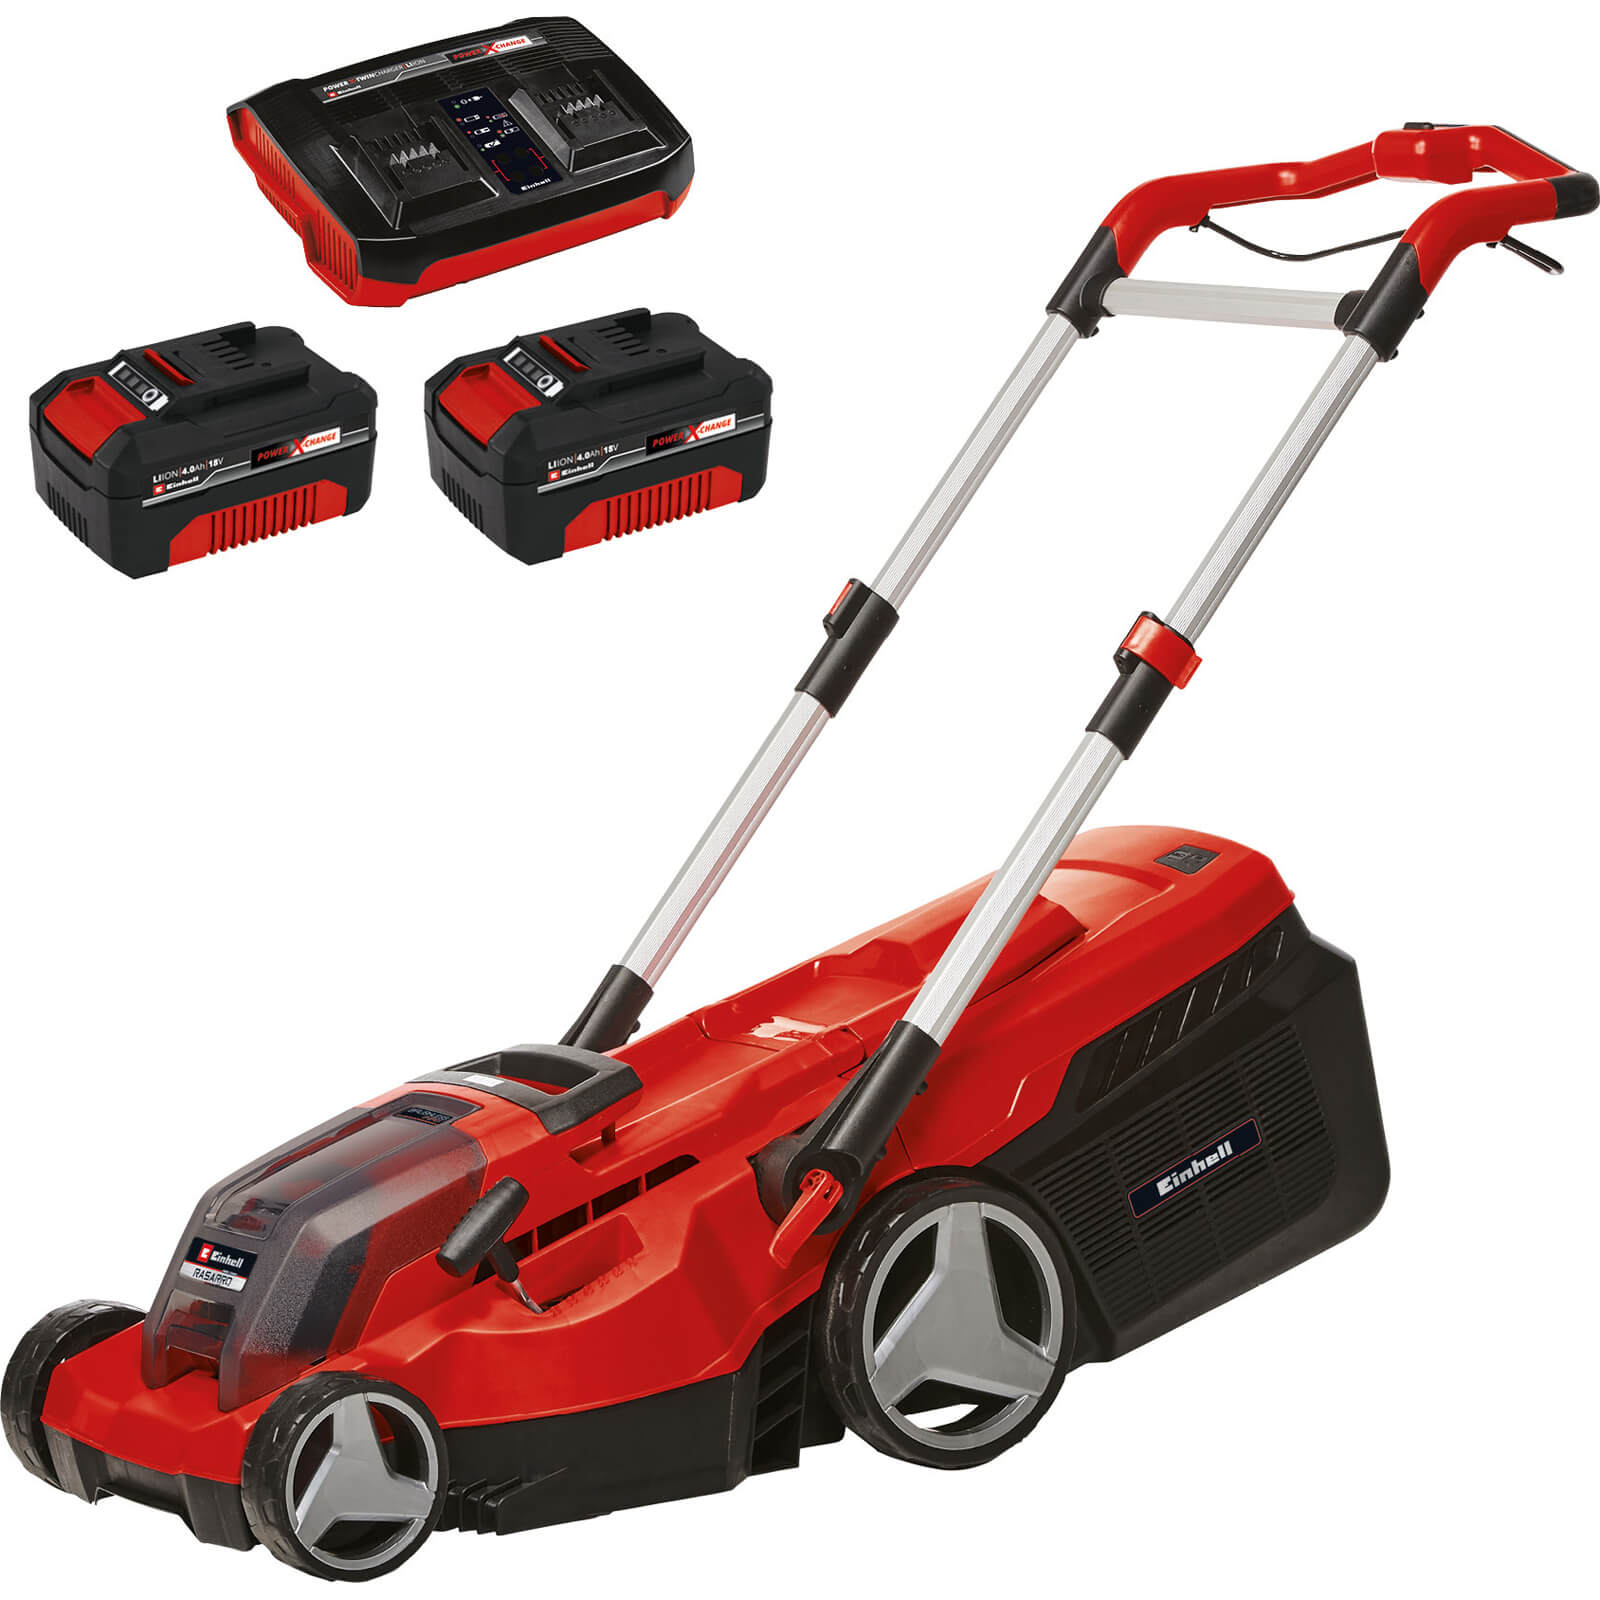 Image of Einhell RASARRO 36/38 36v Cordless Brushless Rotary Lawnmower 380mm 2 x 4ah Li-ion Twin Battery Charger